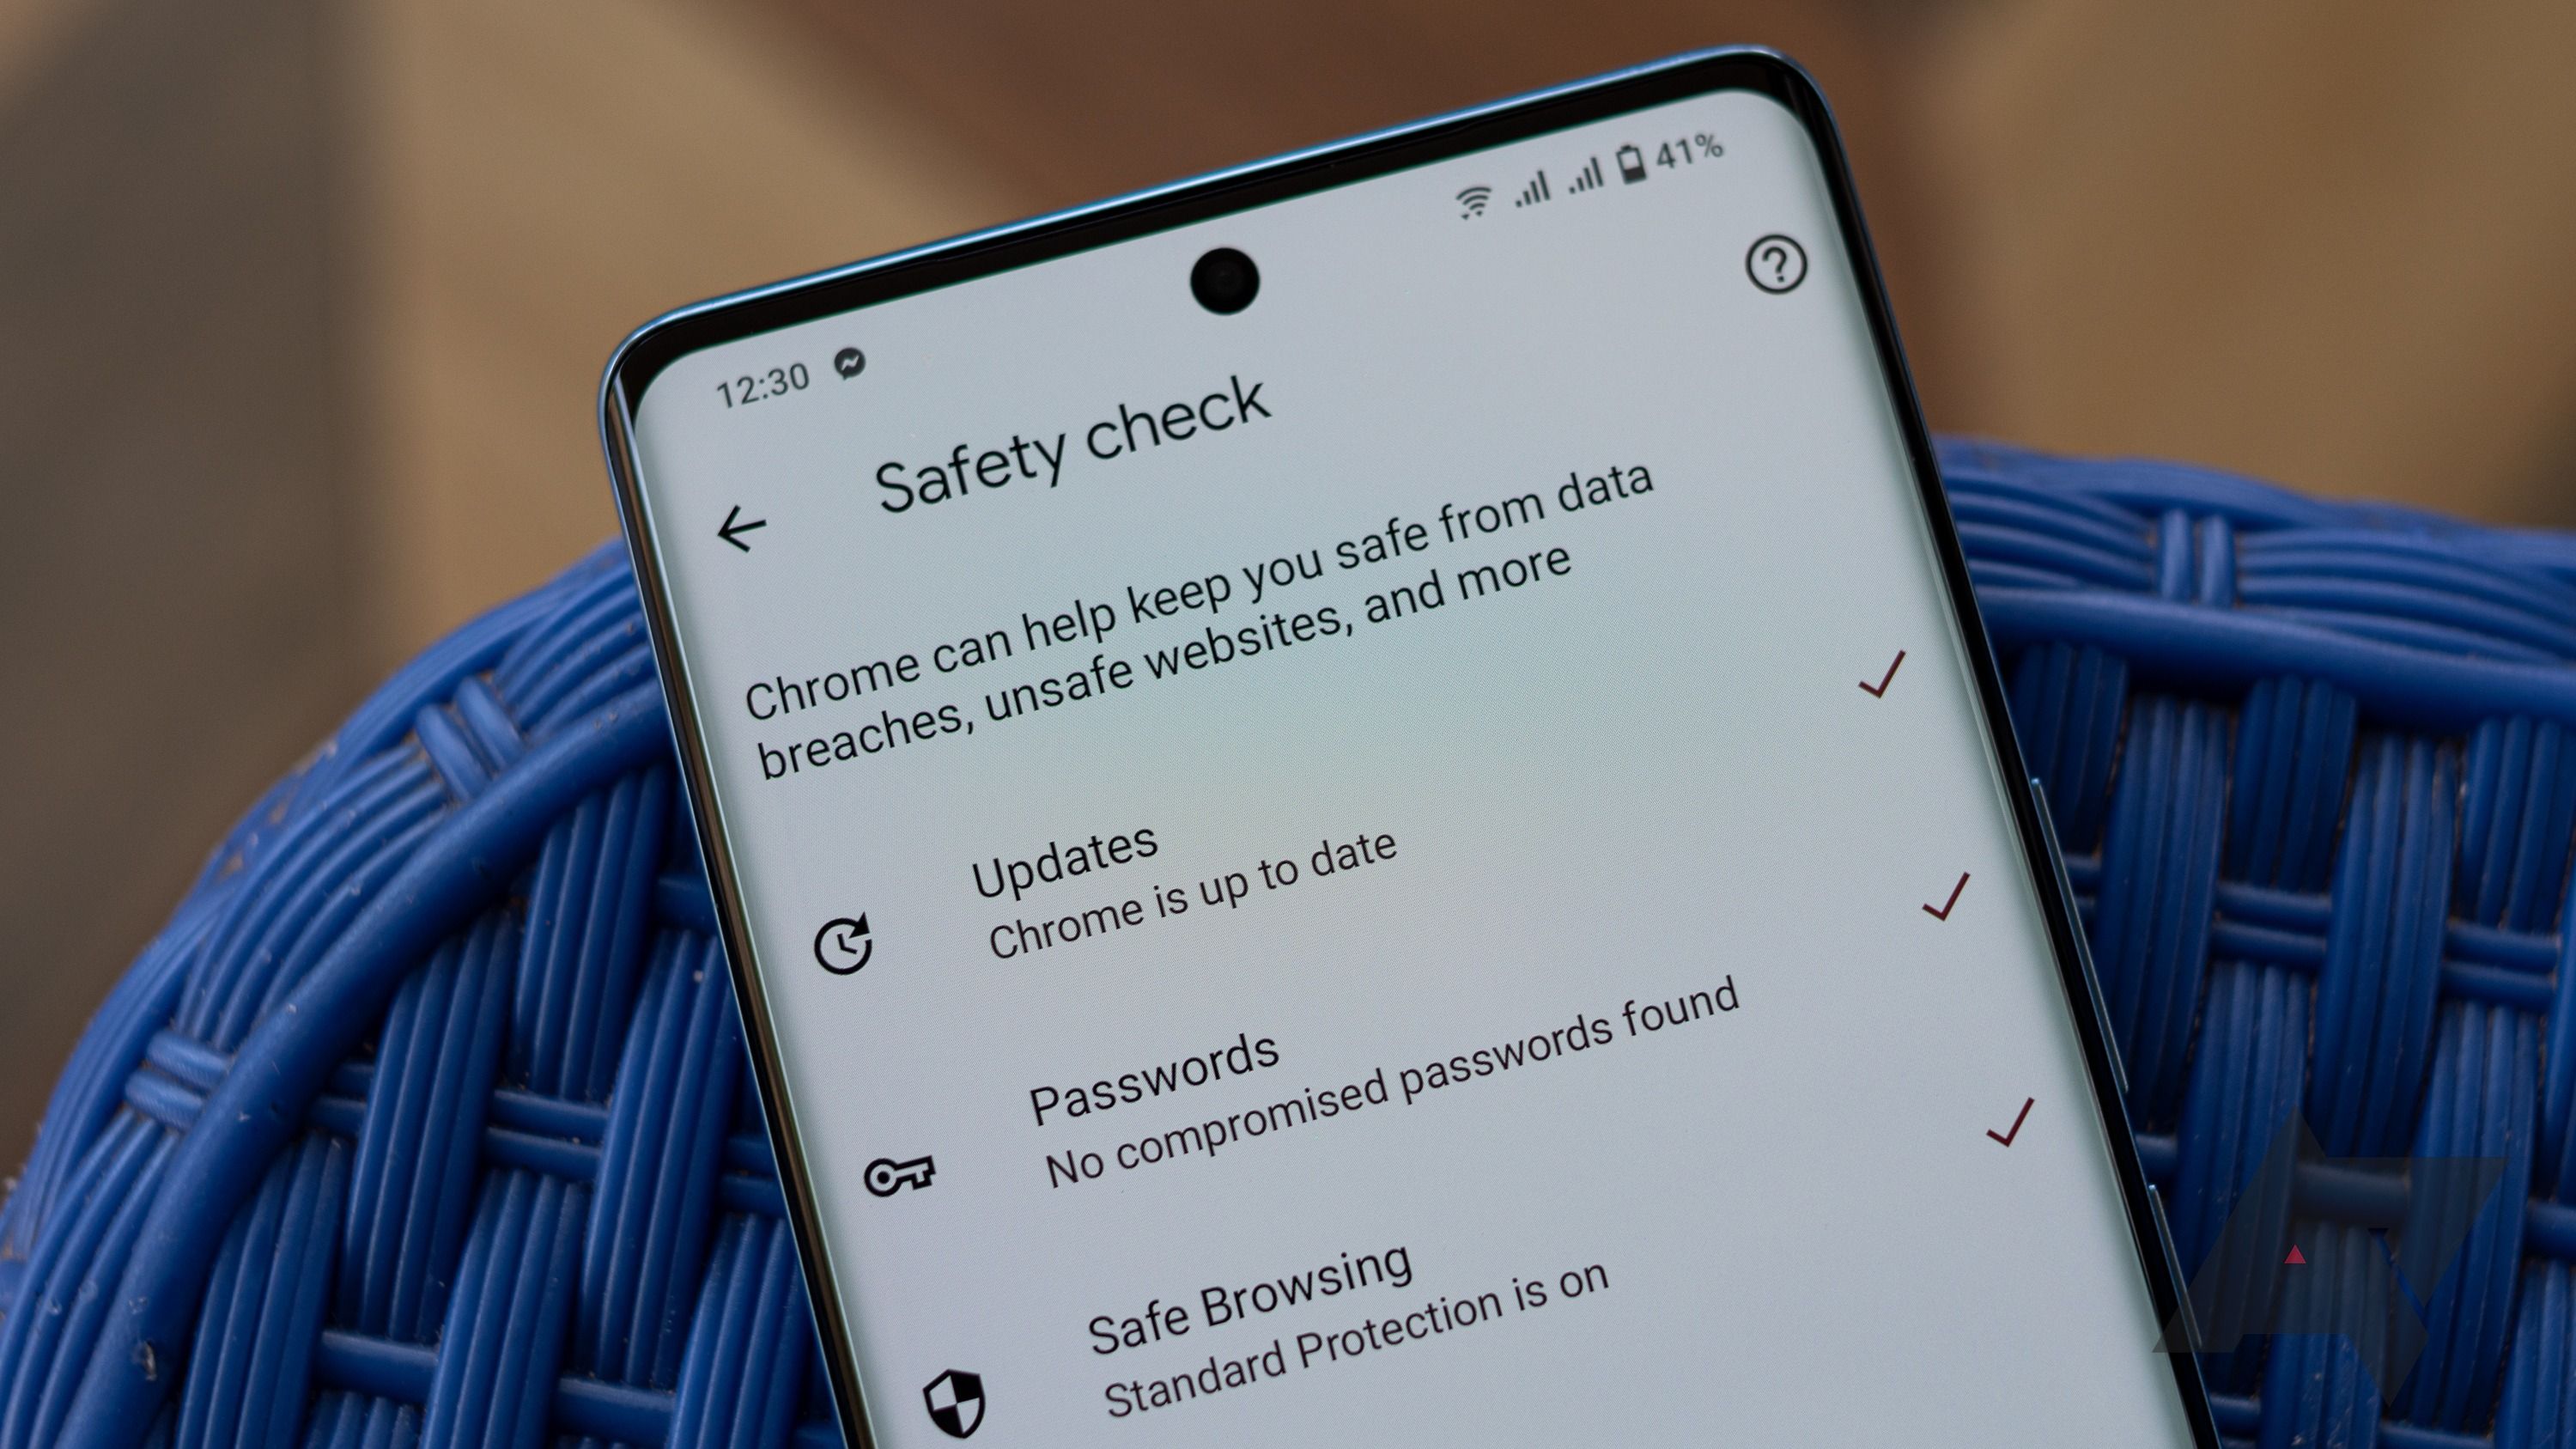 Google safety check interface on a phone screen